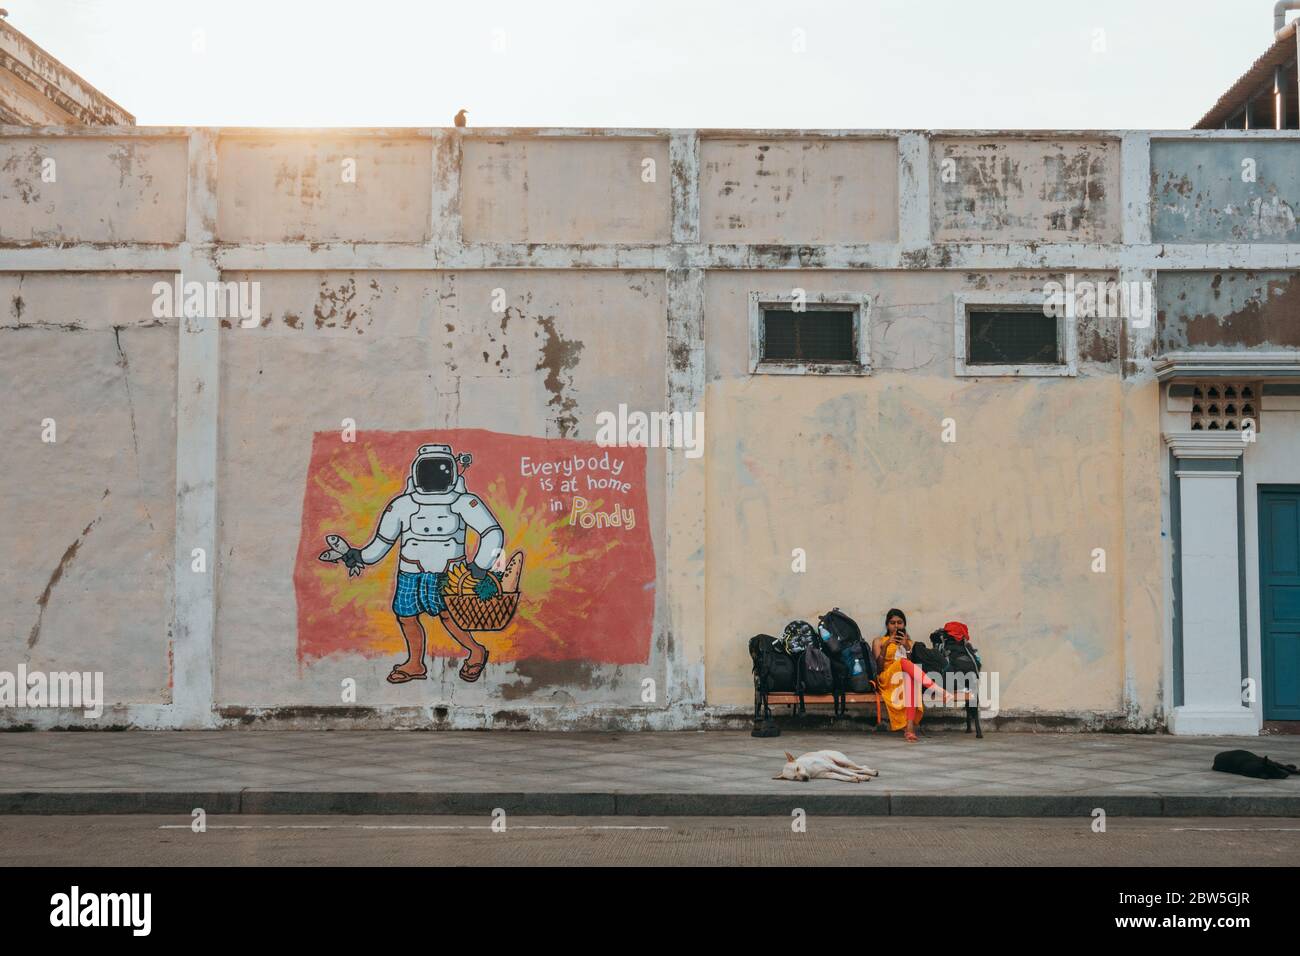 A woman waits with luggage on a bench next to street art with the text 'Everybody is at home in Pondy' in Pondicherry, India Stock Photo